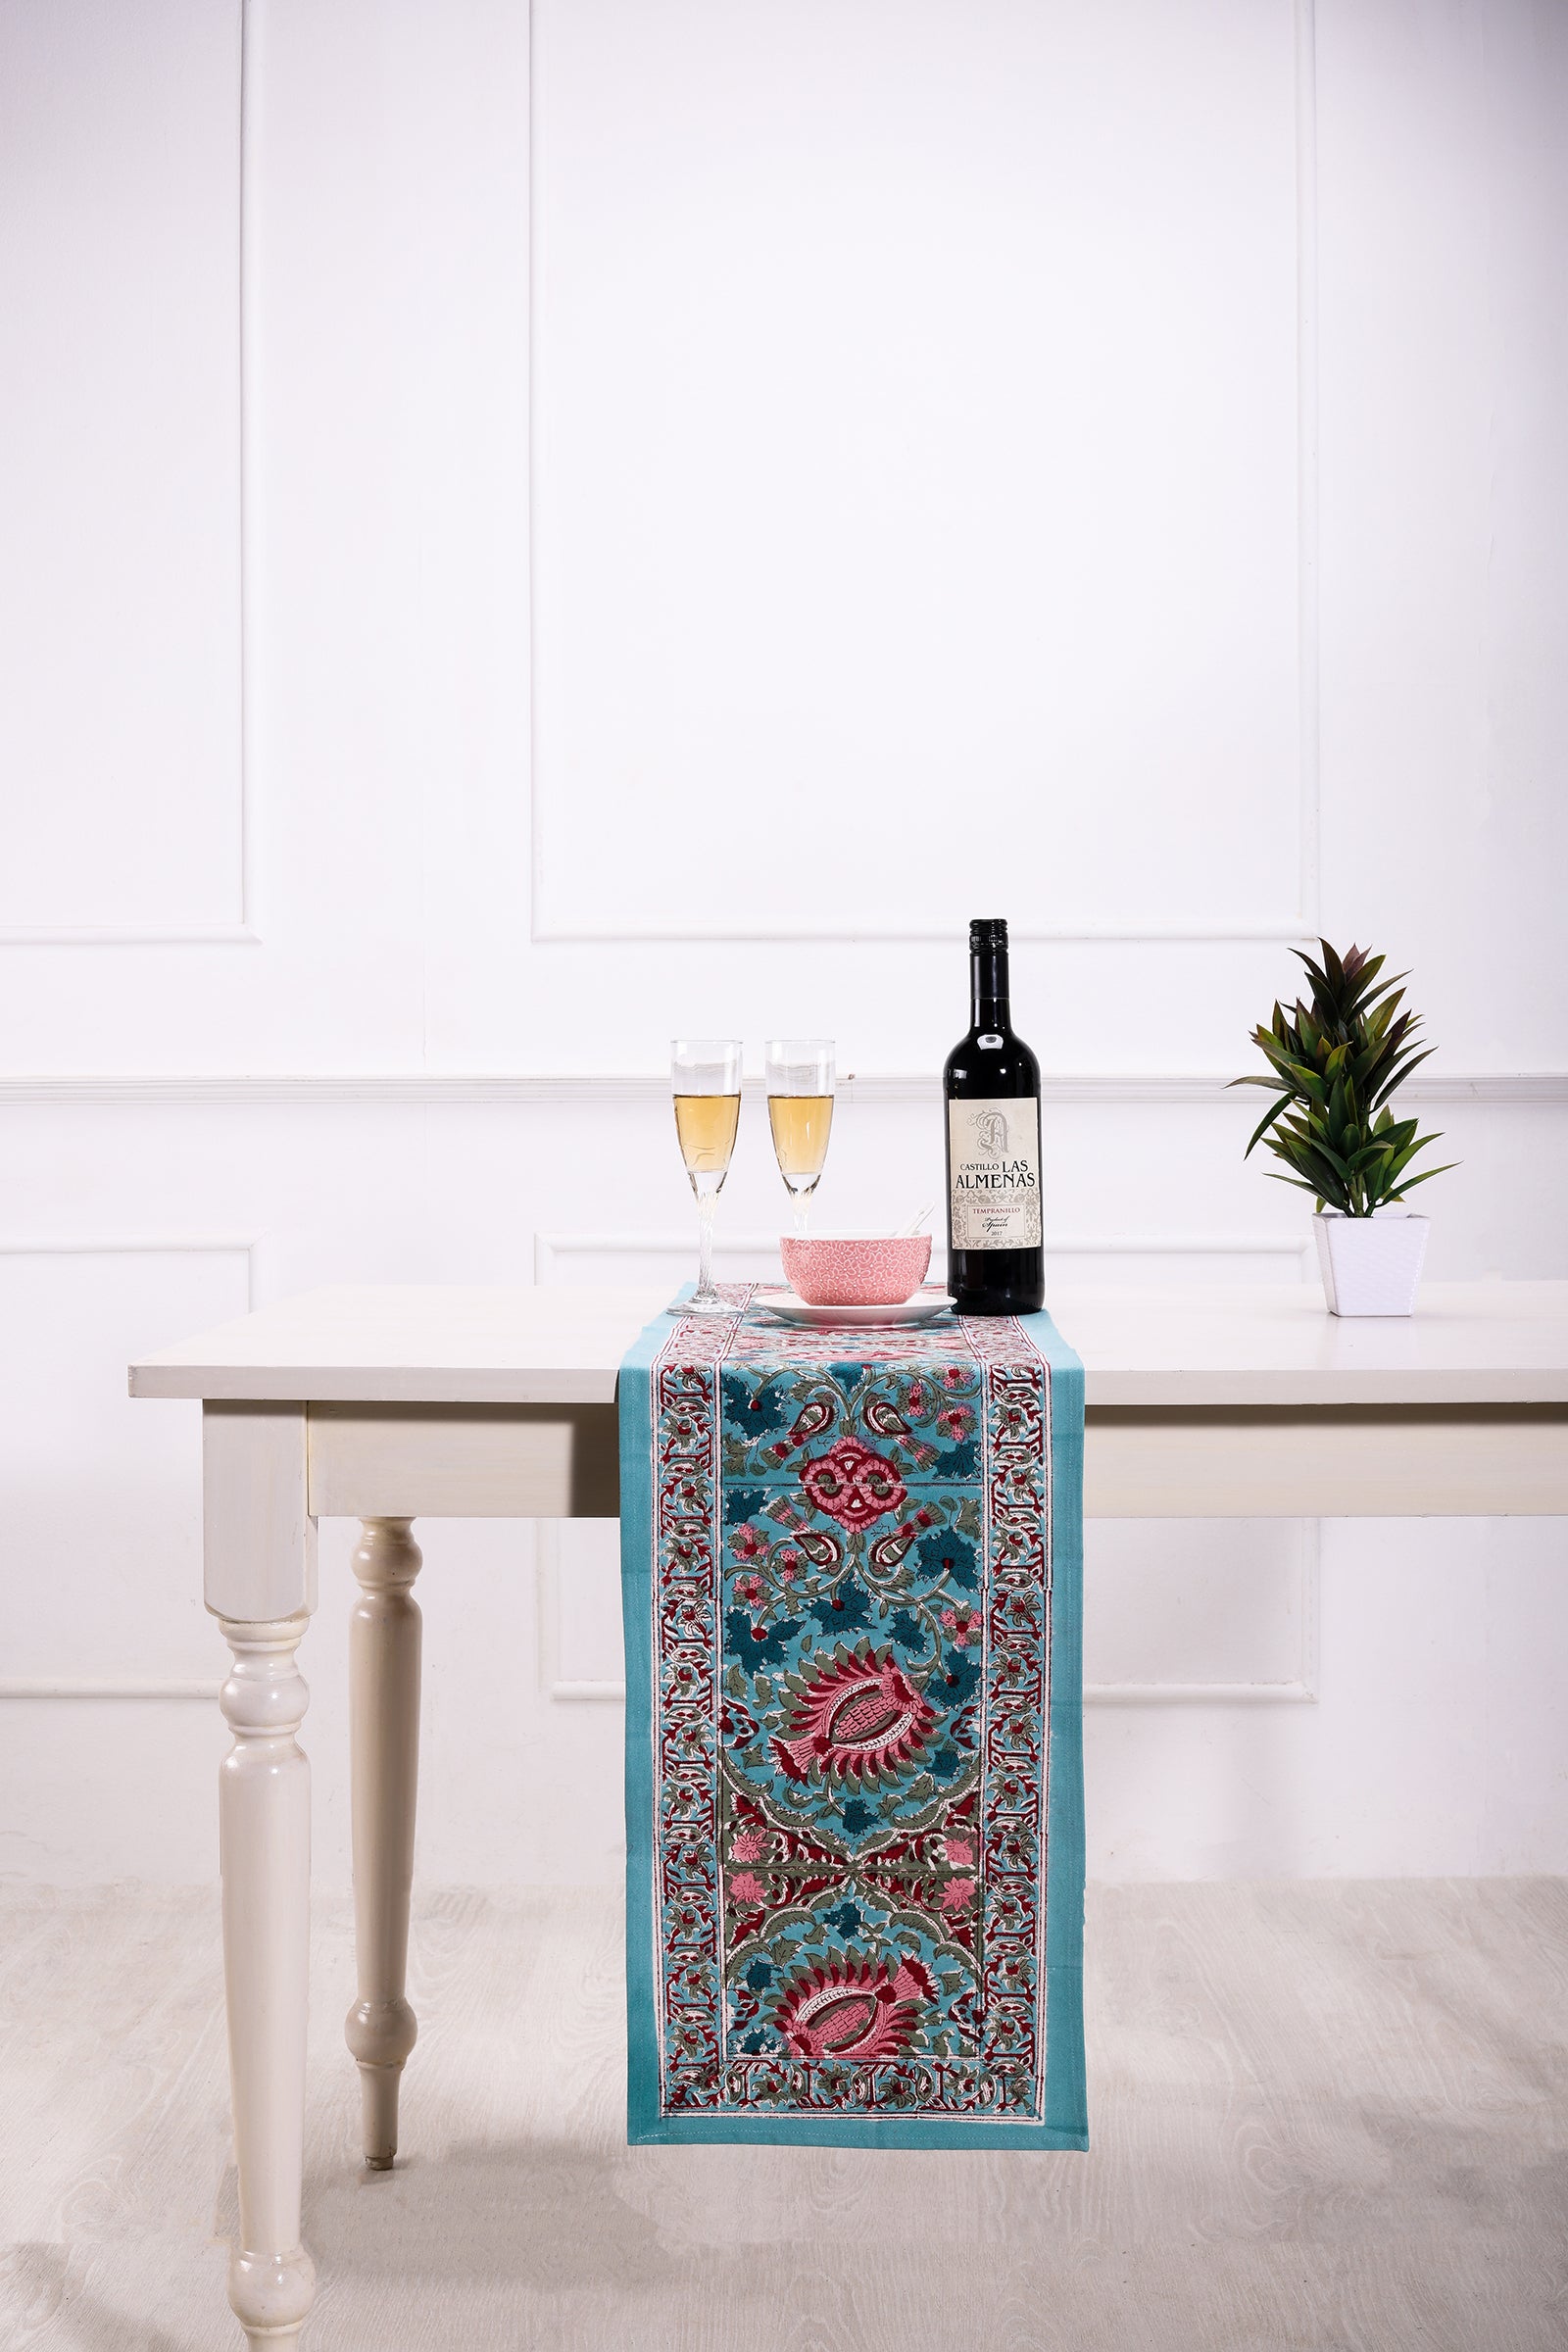 Charmine Floral Bloom Block Printed Turquoise Table Runner - shahenazindia